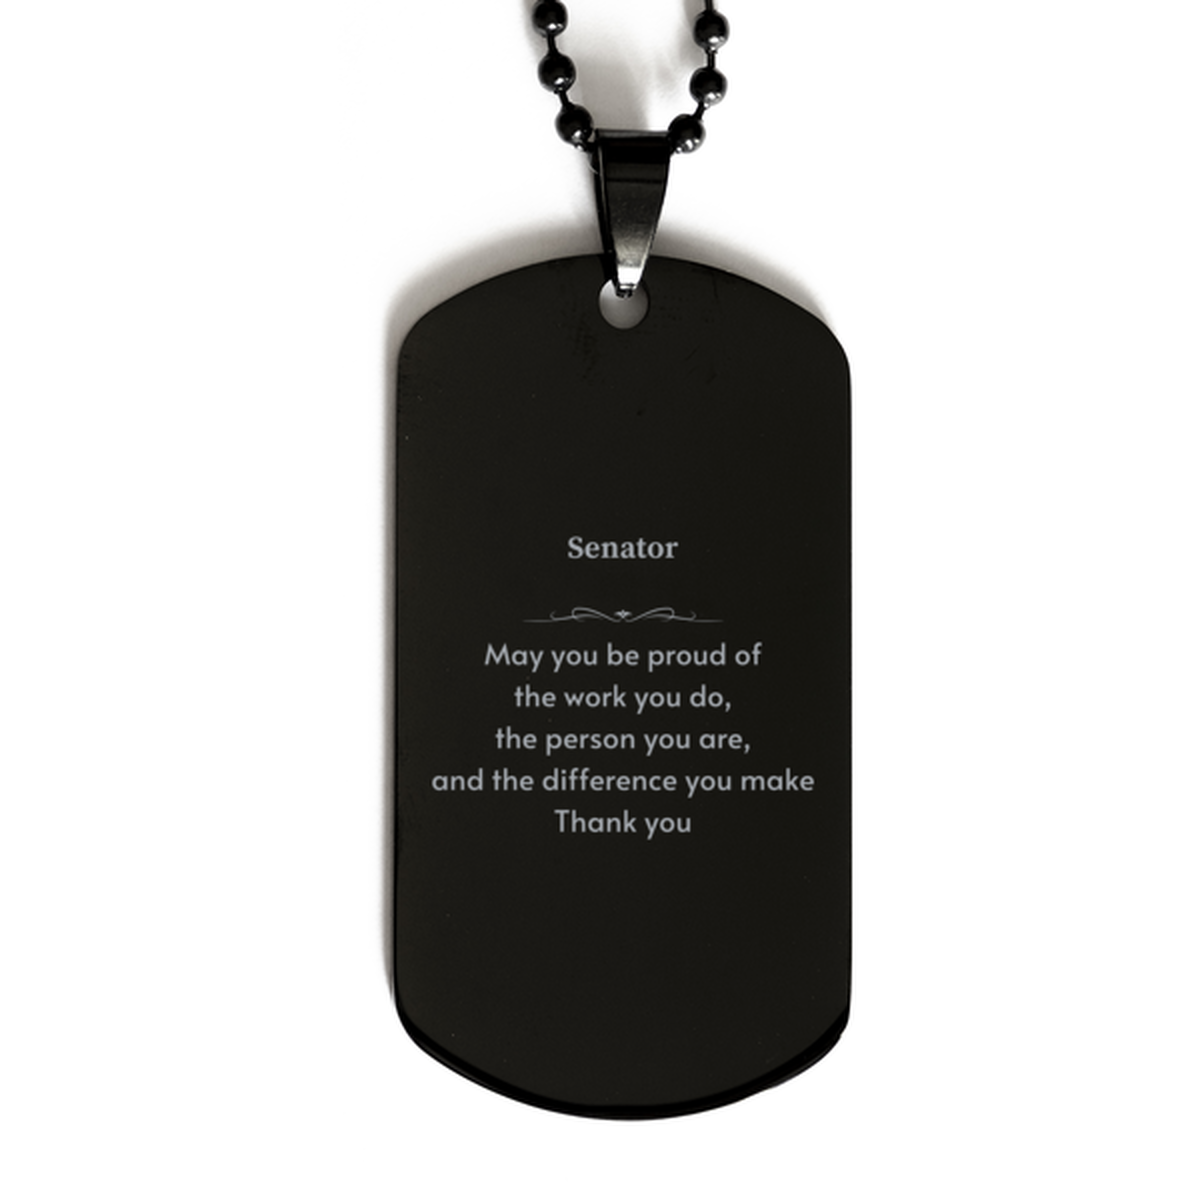 Heartwarming Black Dog Tag Retirement Coworkers Gifts for Senator, Senator May You be proud of the work you do, the person you are Gifts for Boss Men Women Friends